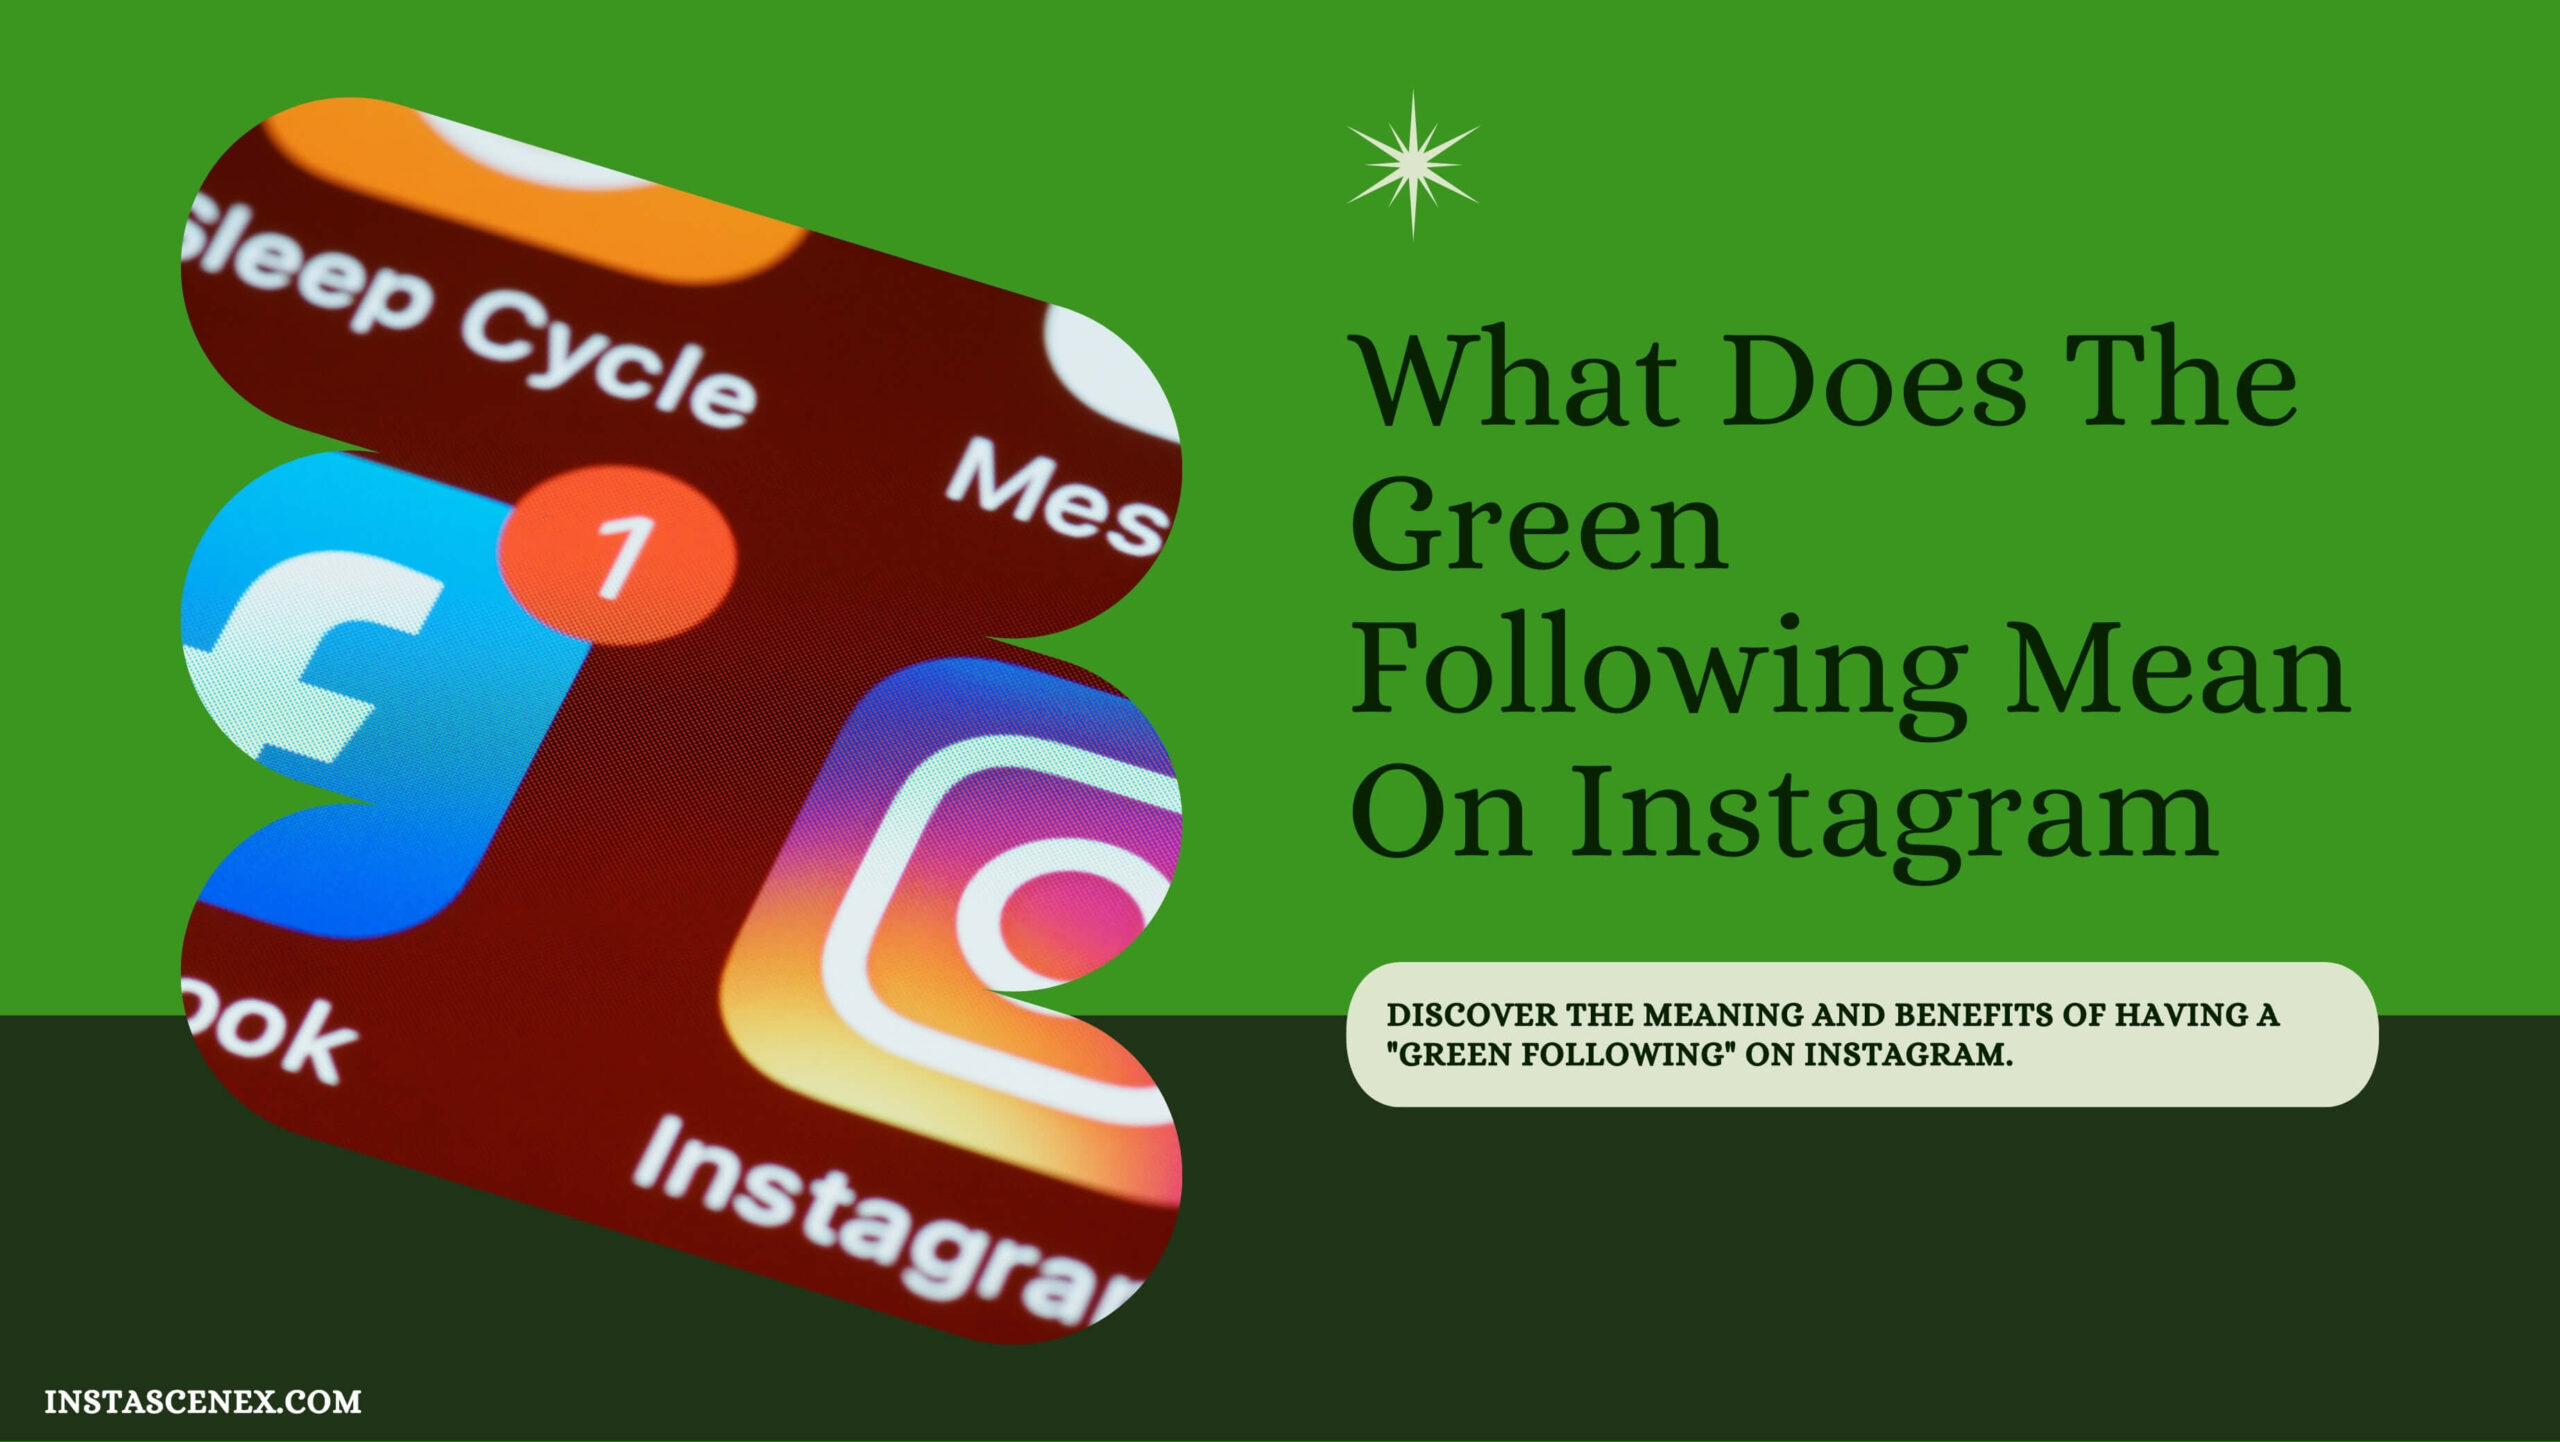 What Does The Green Following Mean On Instagram